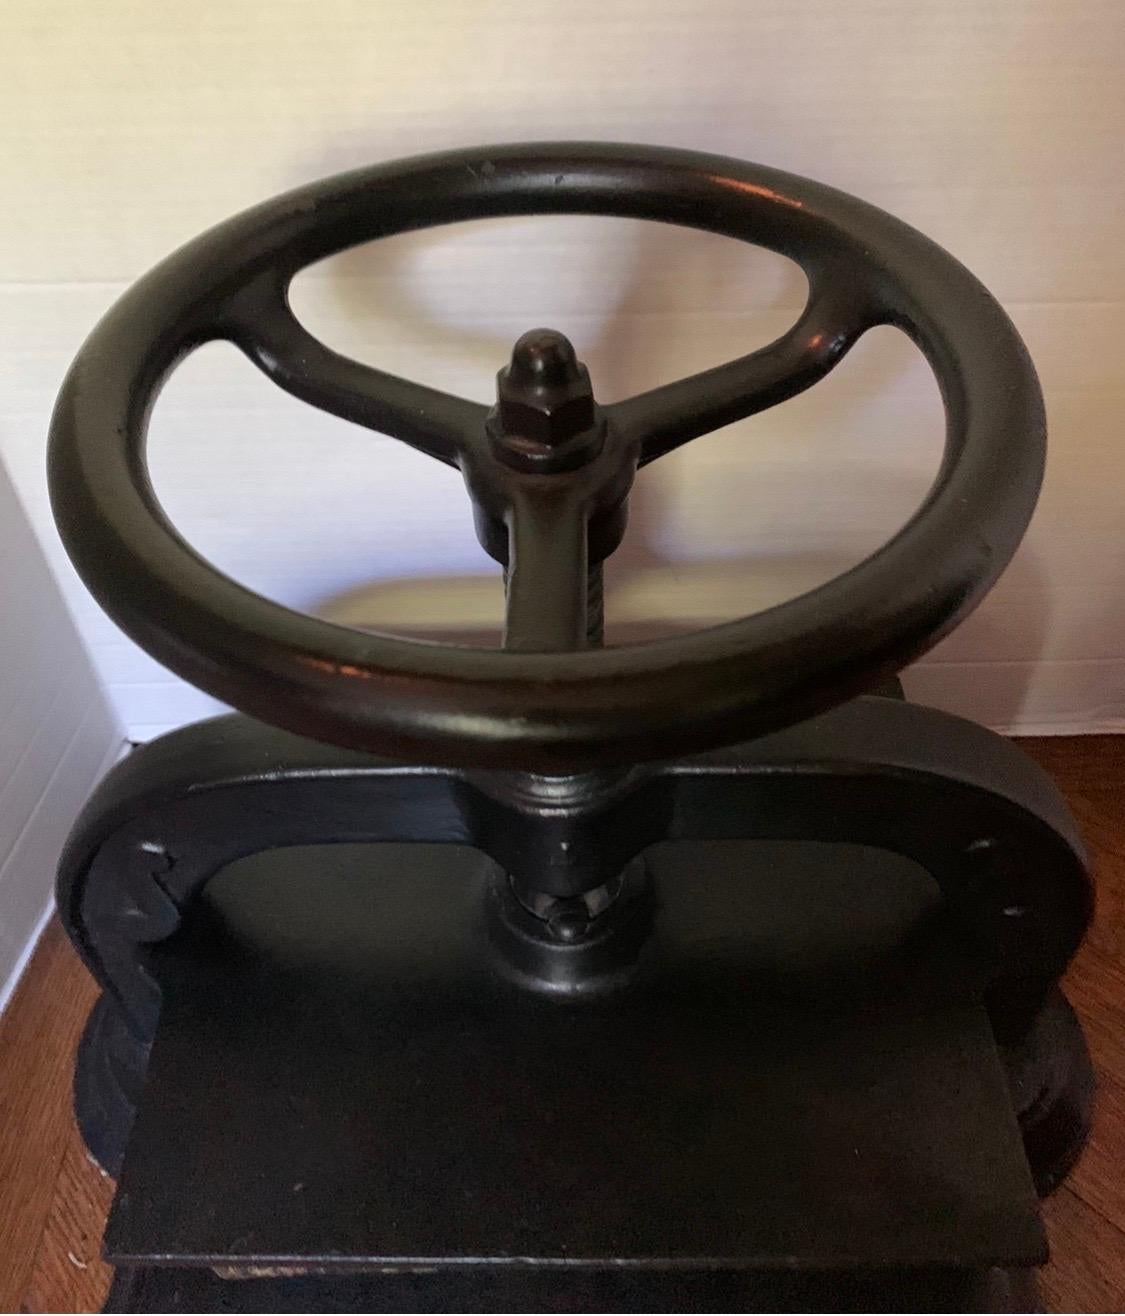 Rare antique cast iron book press used for bookbinding, flower pressing, scrap booking and various other arts and crafts. Has a functional screw-down top-plate.  Best used, in our humble opinion, as an object of art. Heavy, weighs about 50 lbs.